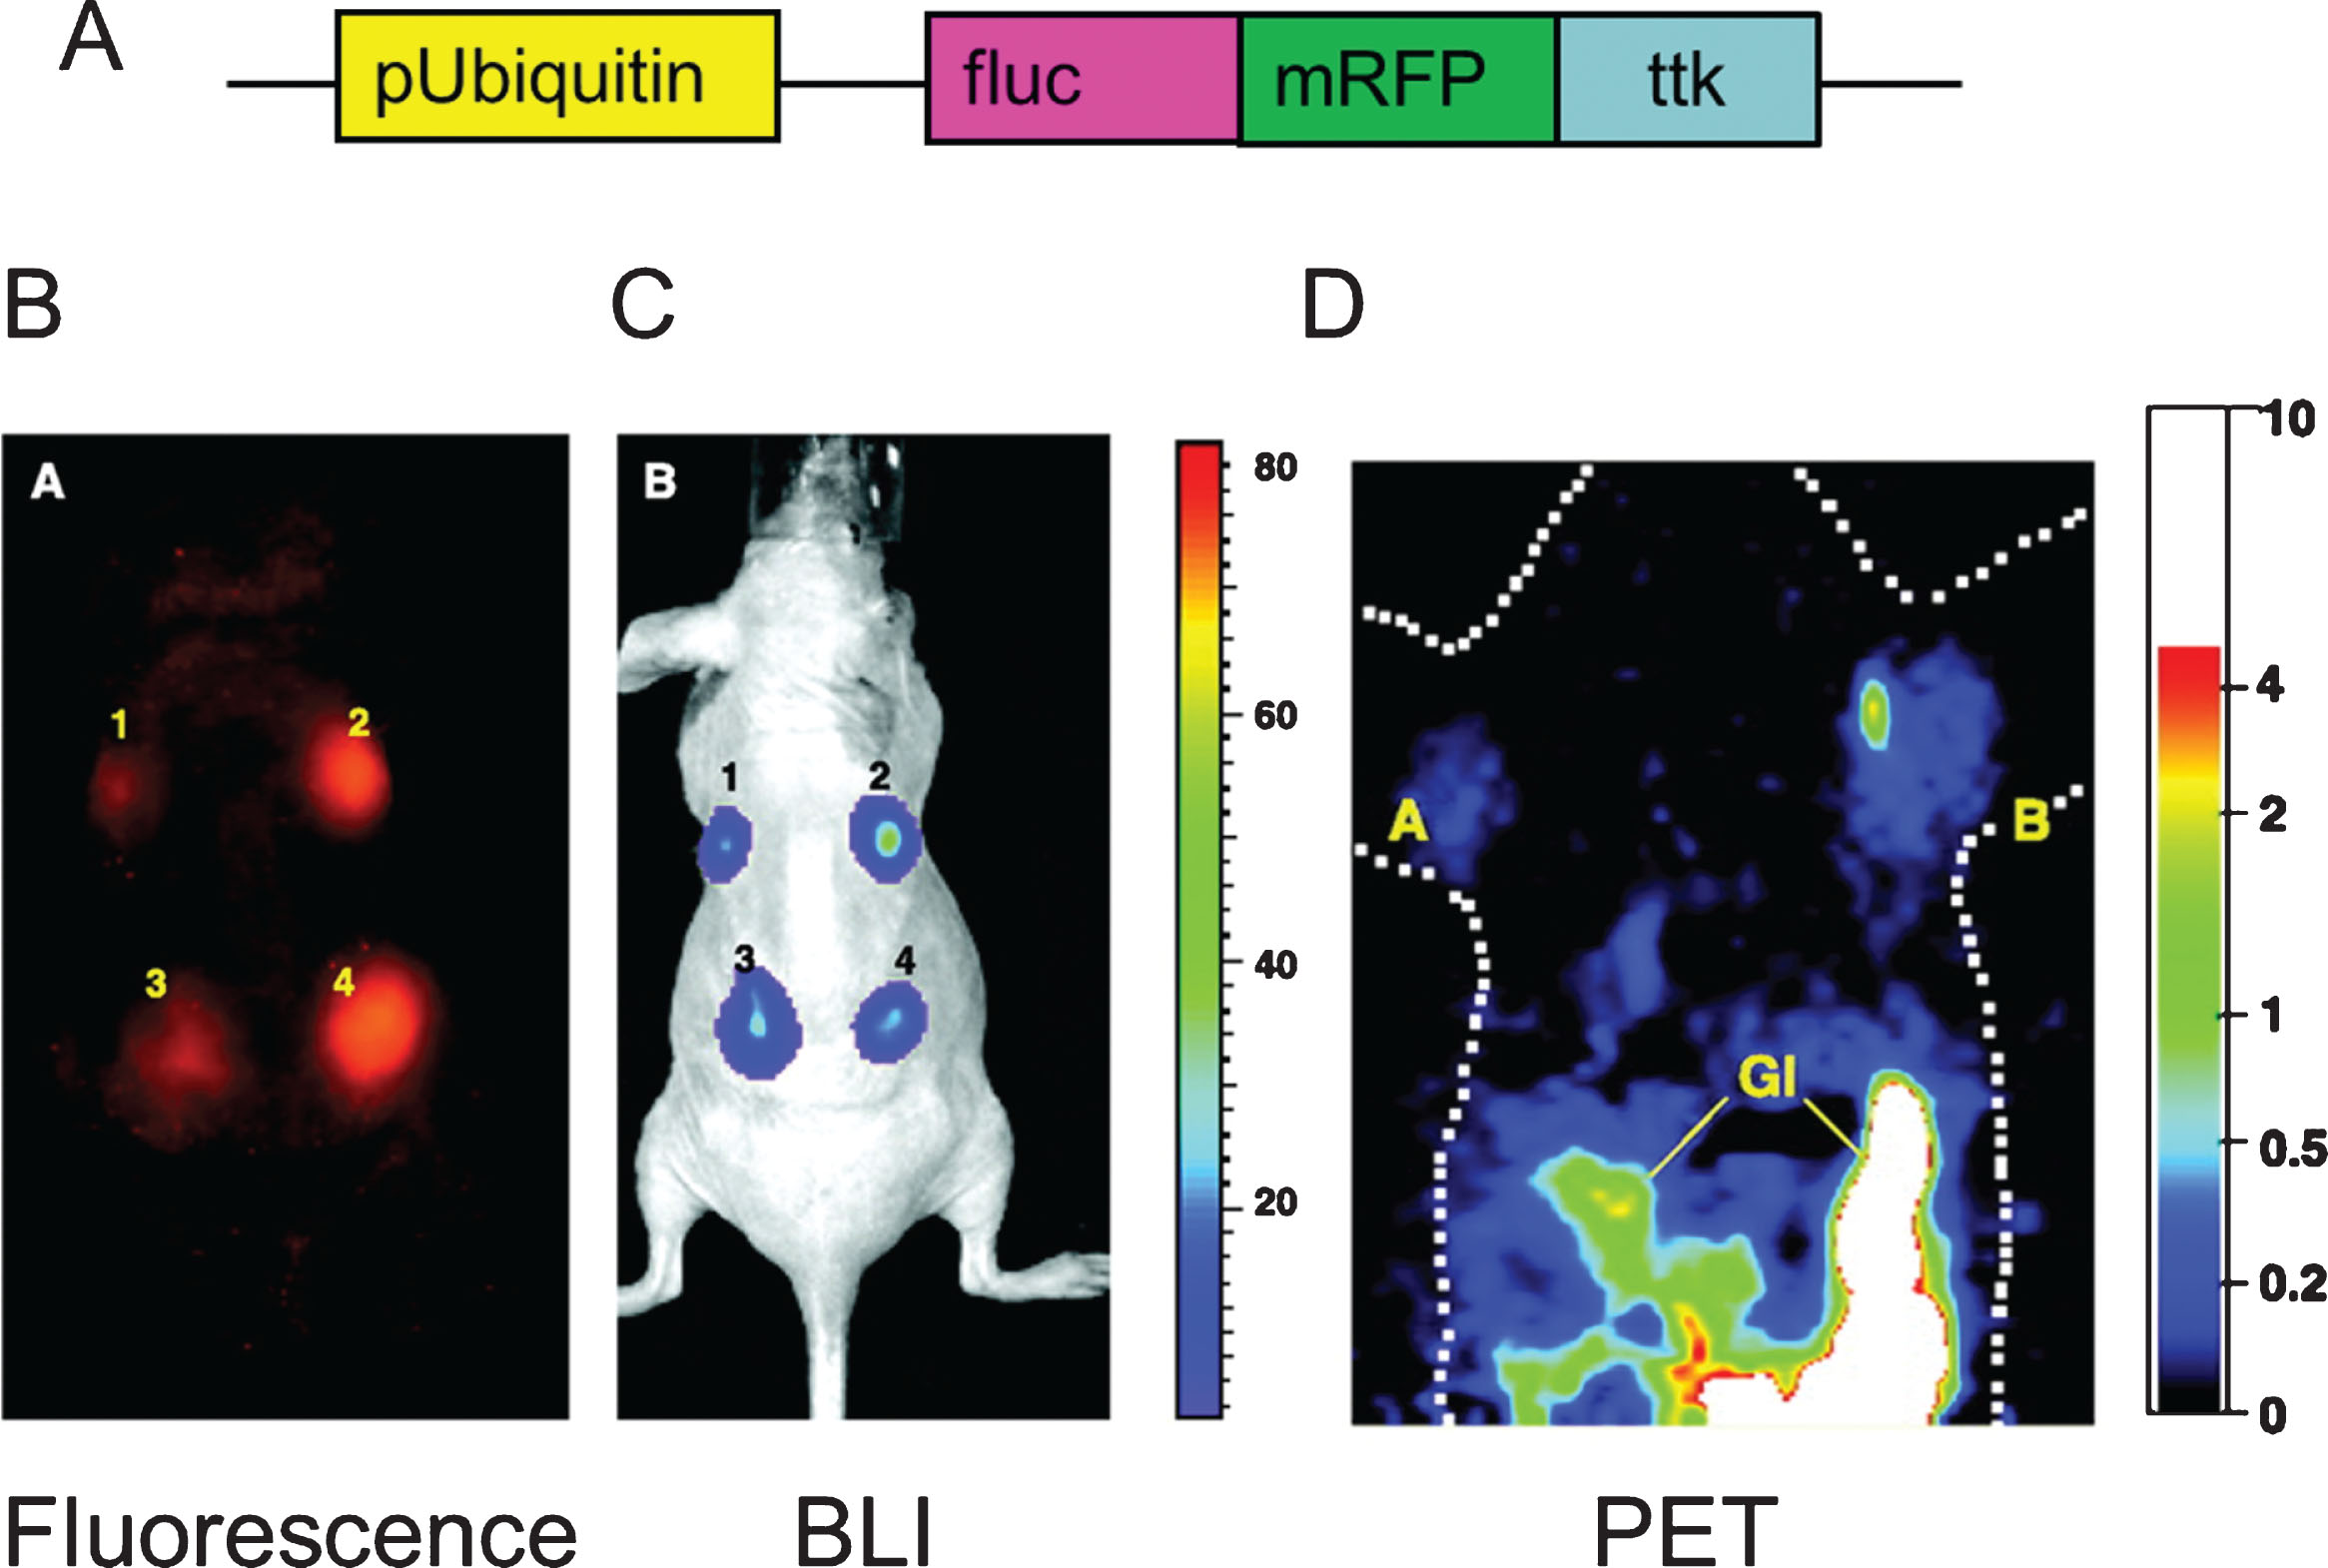 Triple fusion reporter gene. The design of the triple fusion reporter gene is depicted in panel A. The promoter Ubiquitin drives the expression of the fusion protein. fluc: Firefly luciferase (bioluminescence), mrfp: Red fluorescent protein (fluorescence), ttk: thymidine kinase (PET). The fluorescent protein (panel B) is use for fluorescent activated still sorting (FACS) ex vivo, while it can also be used for histology ex-vivo. In this study, stem cells carrying the triple fusion reported gene were delivered to the myocardium of rodents and imaged with the bioluminescence portion of the reporter gene with high sensitivity (panel C) while the positron emission tomography imaging capabilities of the reported gene is critical for clinical translation (panel D). Reprinted from Ray P, et al. Construction and Validation of Improved Triple Fusion Reporter Gene Vectors for Molecular Imaging of Living Subjects. Cancer Research 2007 Apr 1;67(7):3085-93 with permission.